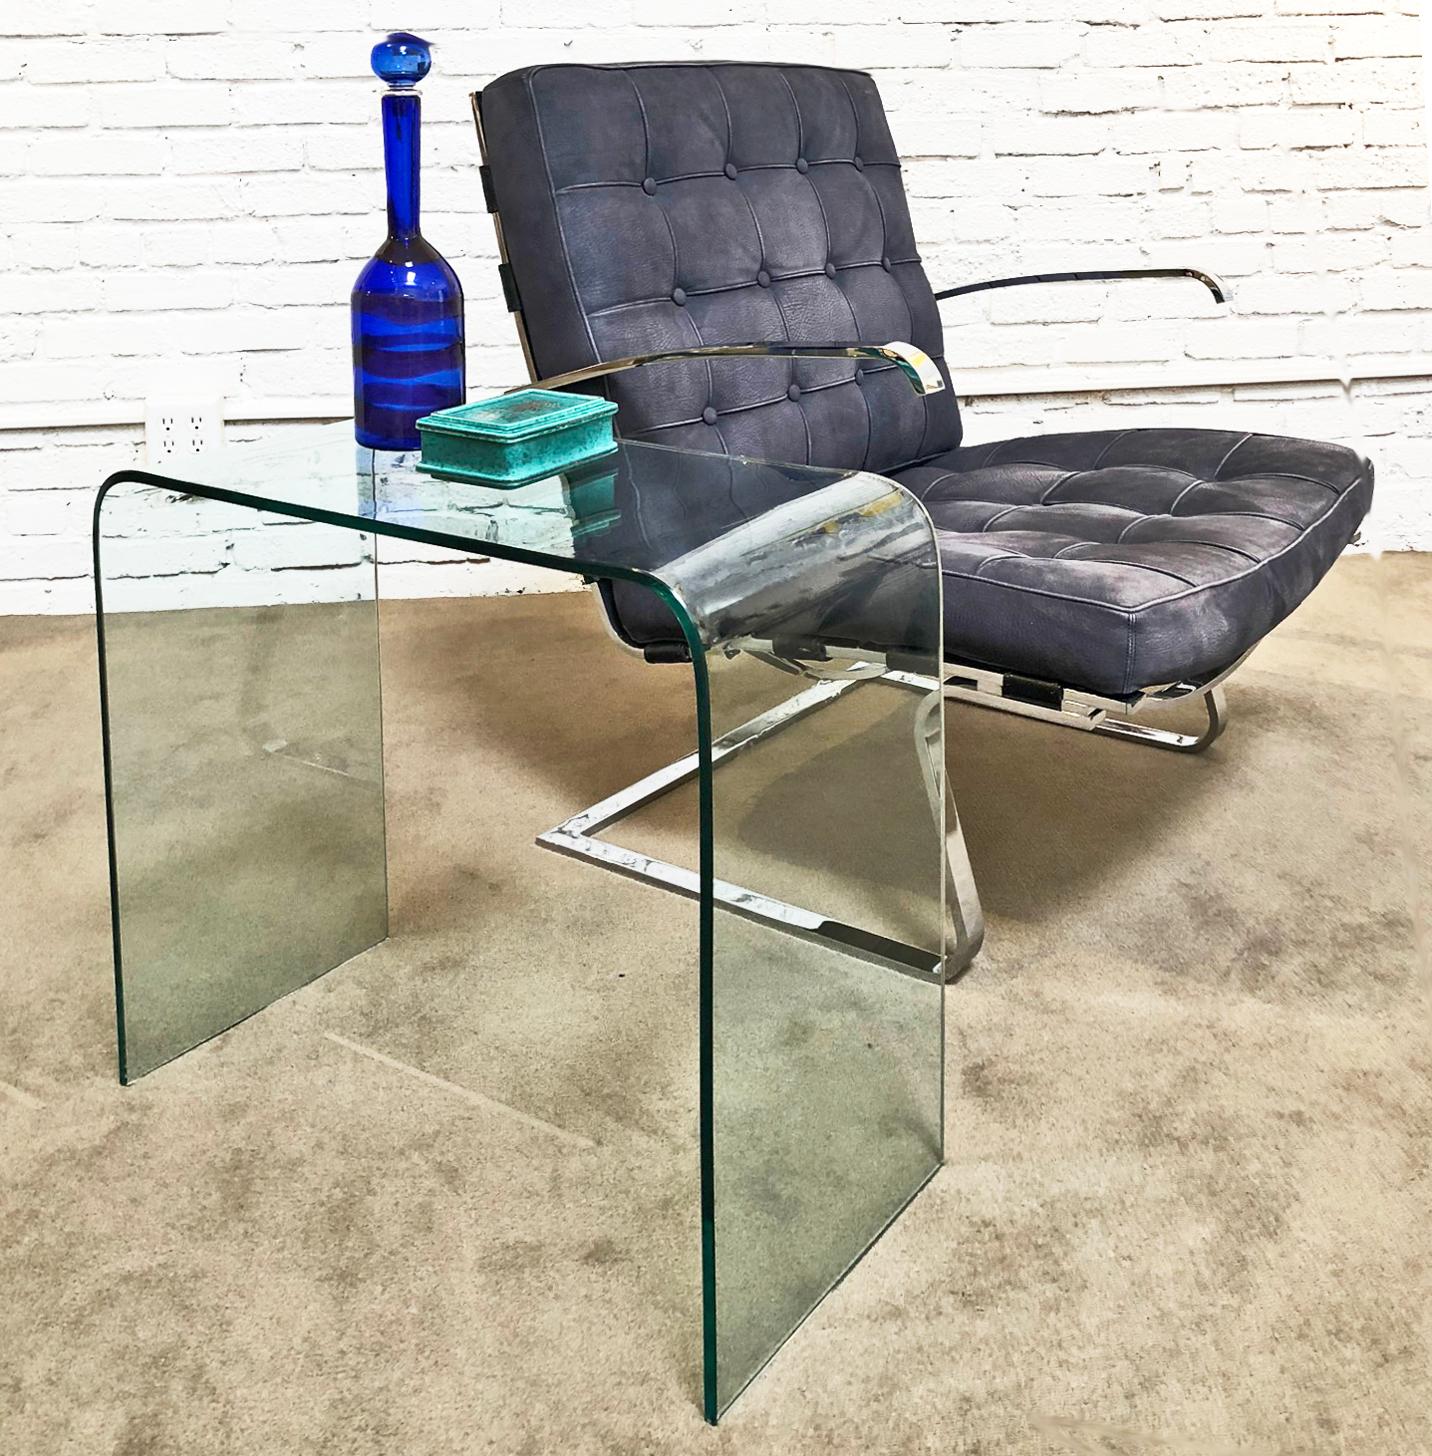 Pair of modern glass side tables. Bent clear glass. Price is for the pair.